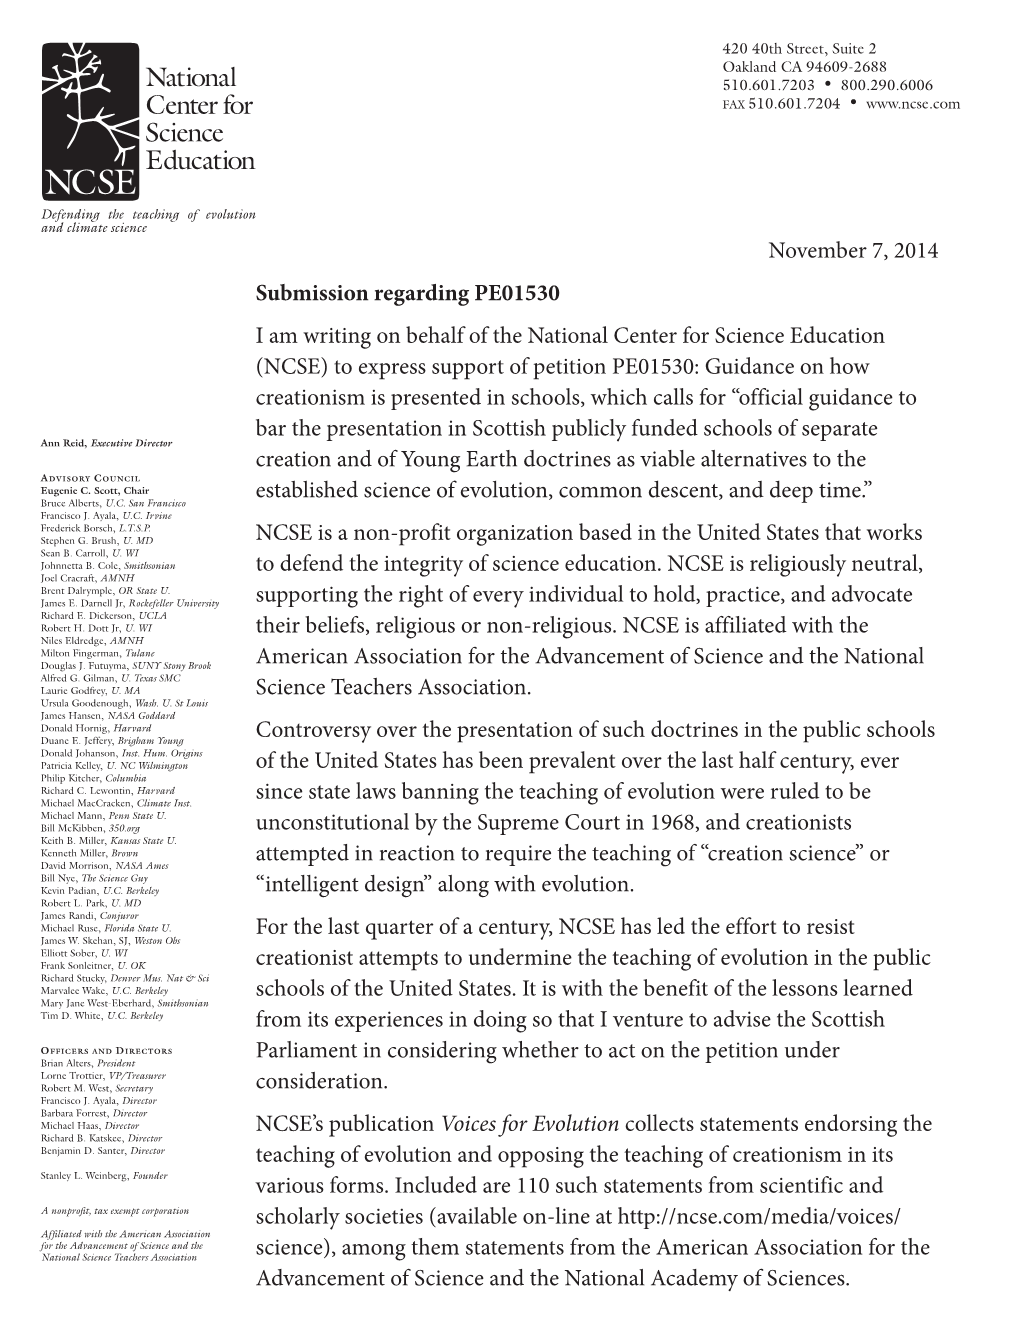 PE1530/L: National Center for Science Education Letter of 7